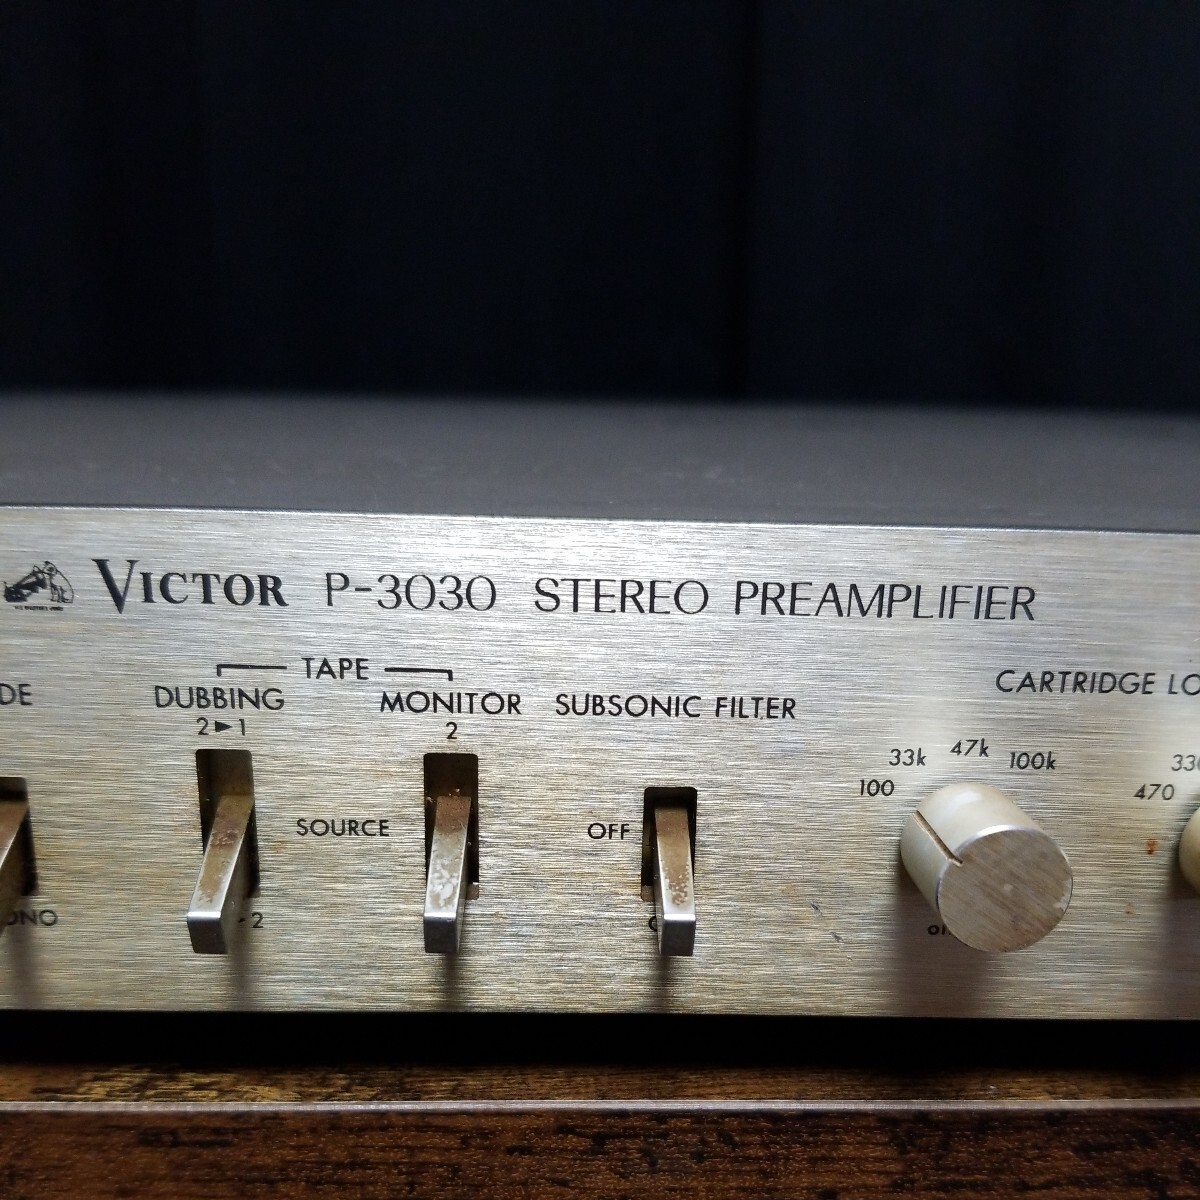  Victor control amplifier P-3030 Victor electrification verification only present condition goods junk treatment control number O11